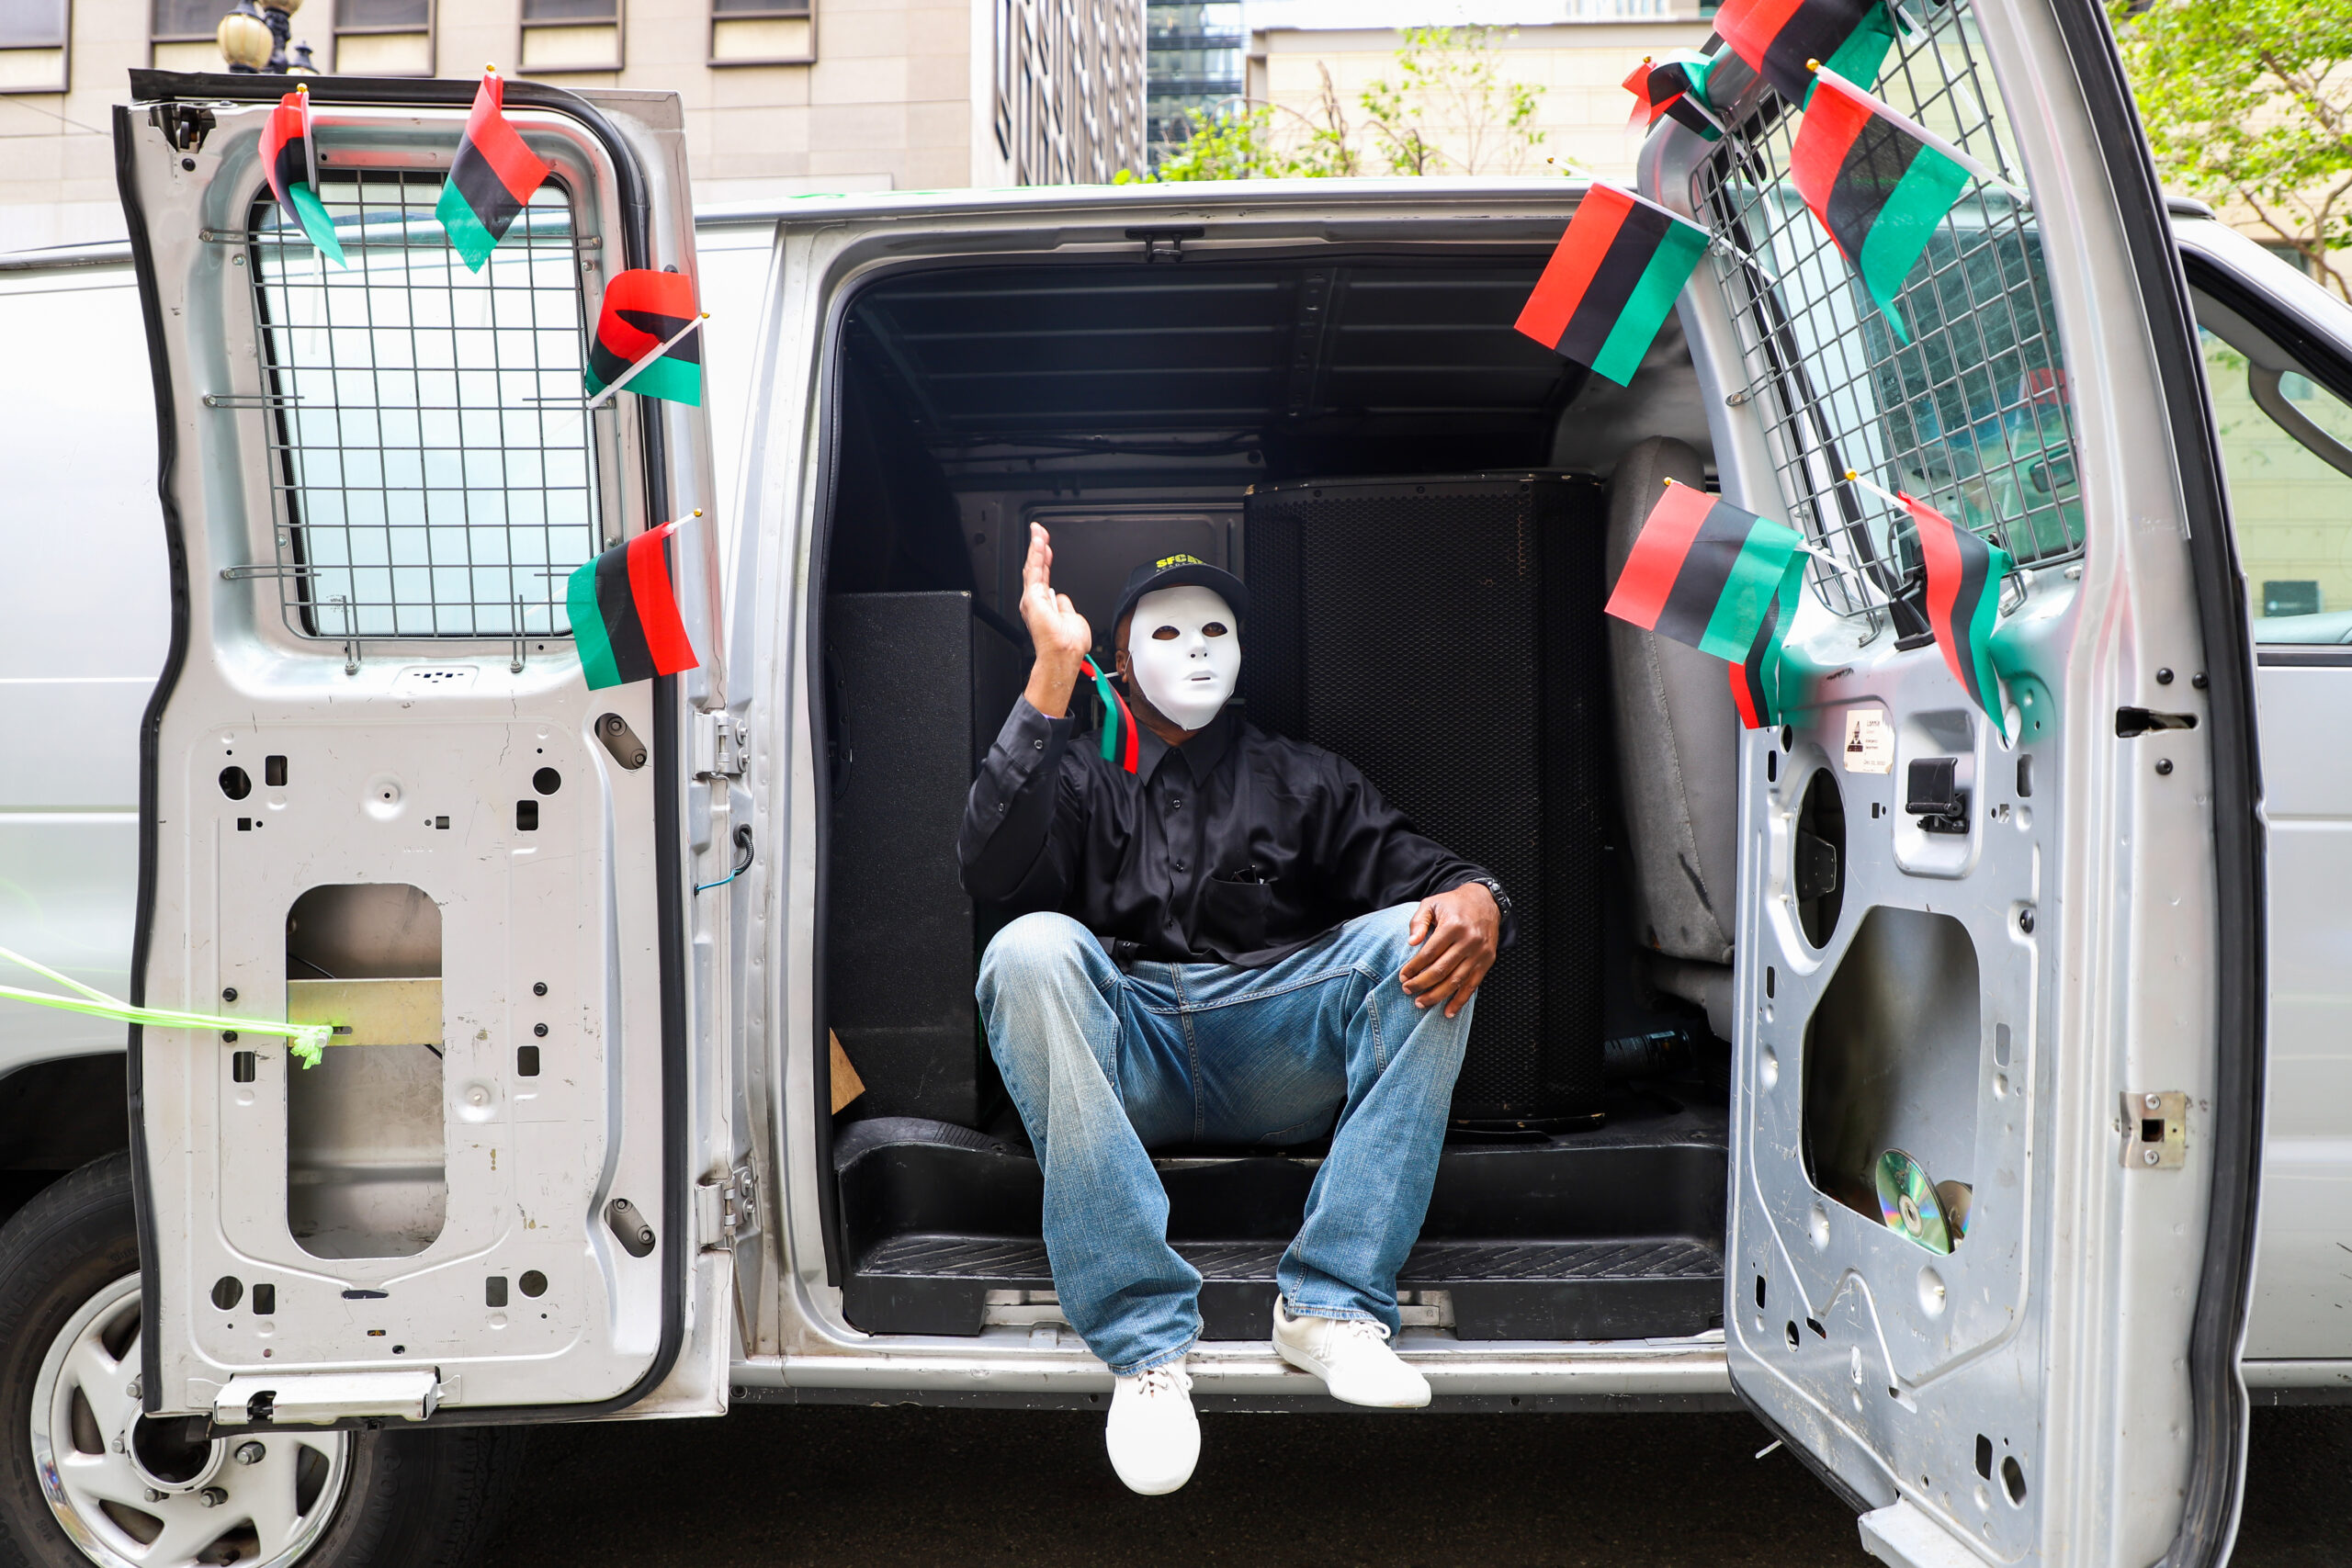 A person in a white mask sits in an open van door, gesturing, with red, black, and green flags attached around them.